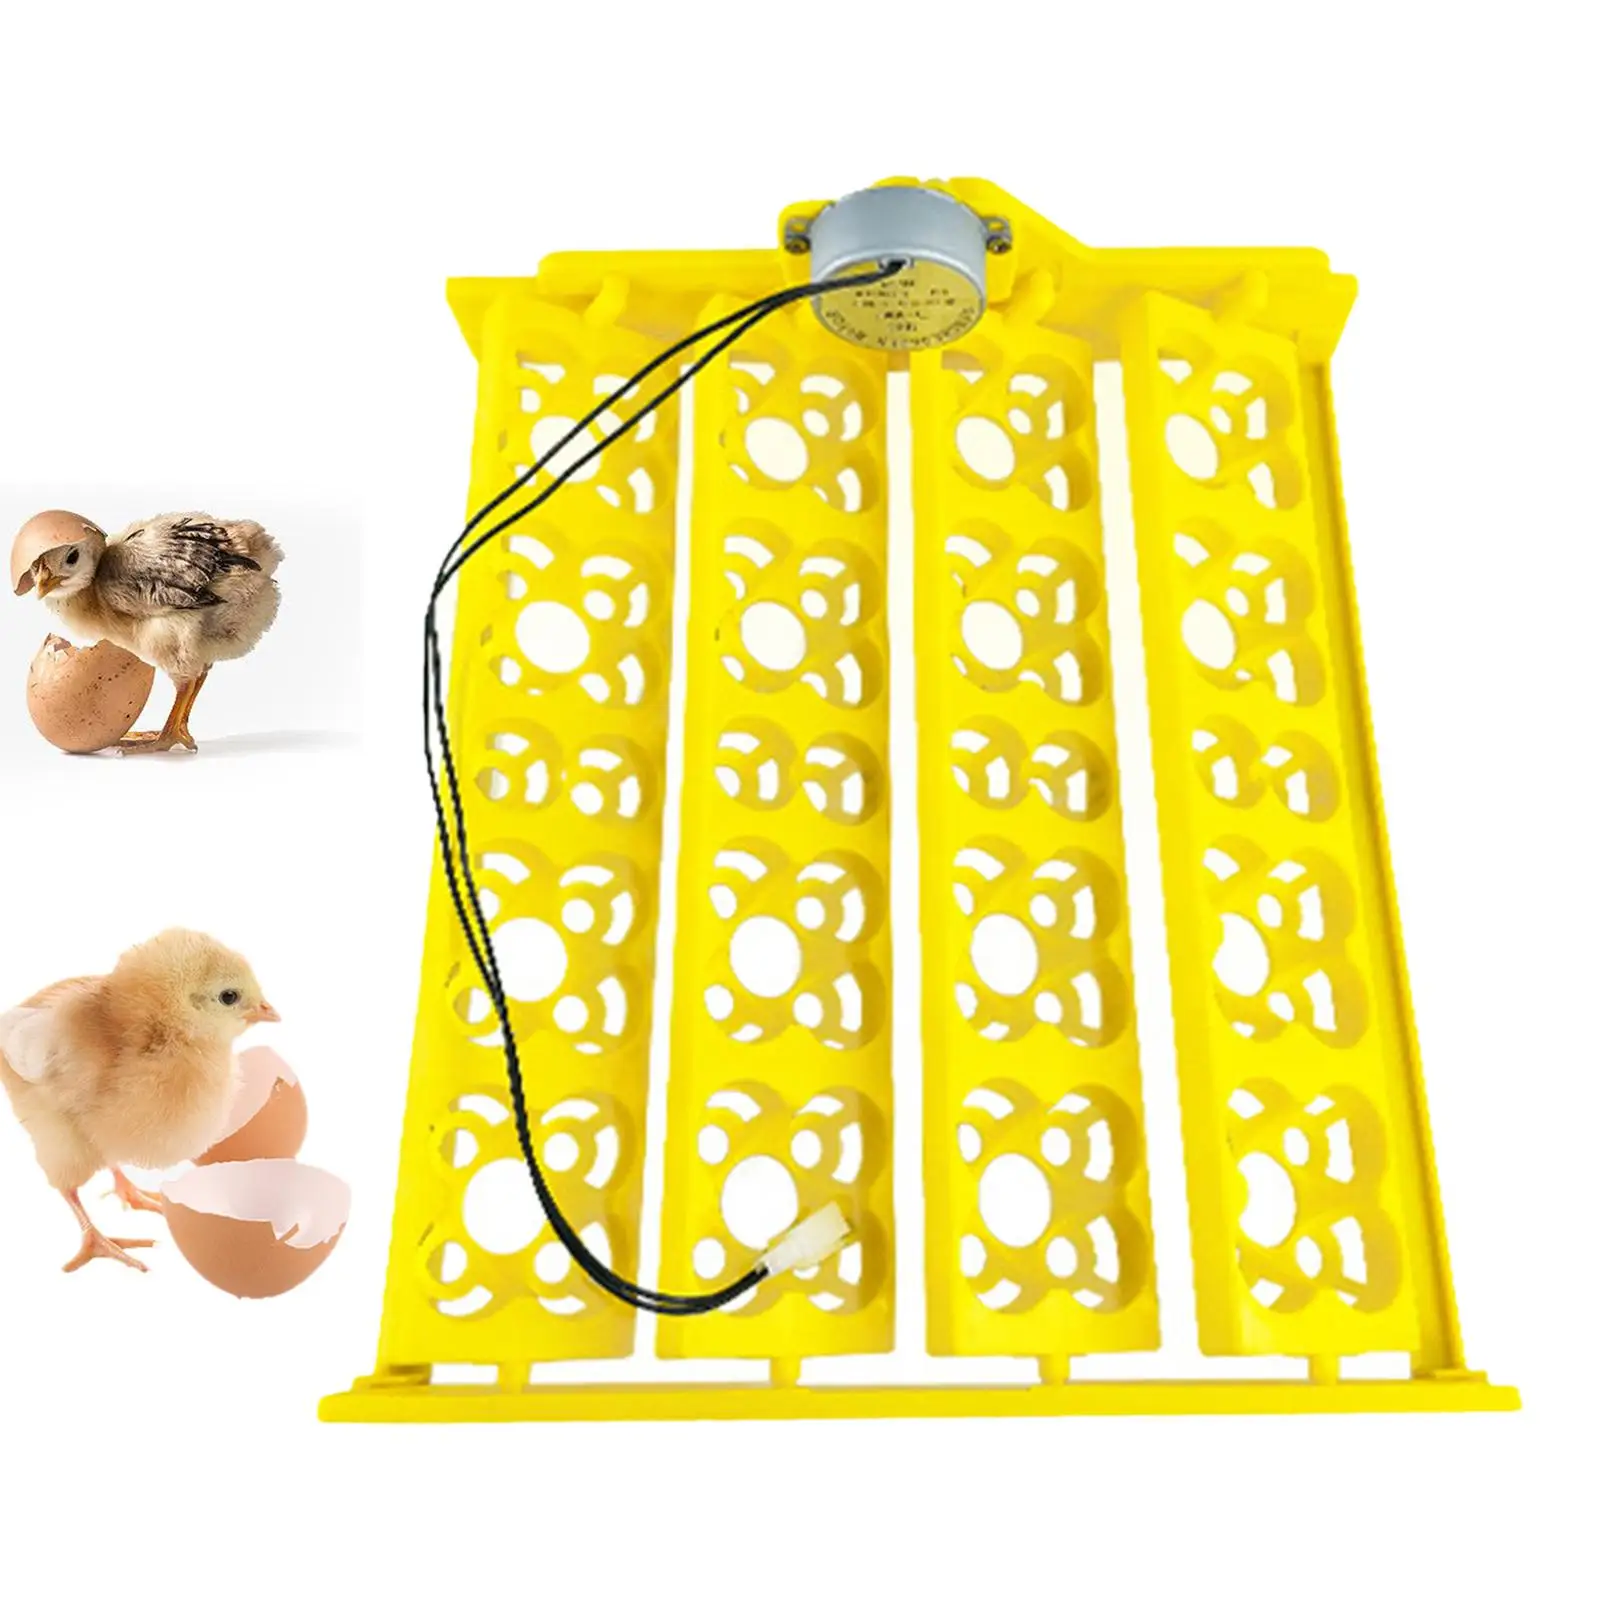 

Egg Incubator Tray Egg Turner Turning Tray Egg Hatcher Machine Accessory with Automatic Turning Motor for Birds Duck Goose Quail